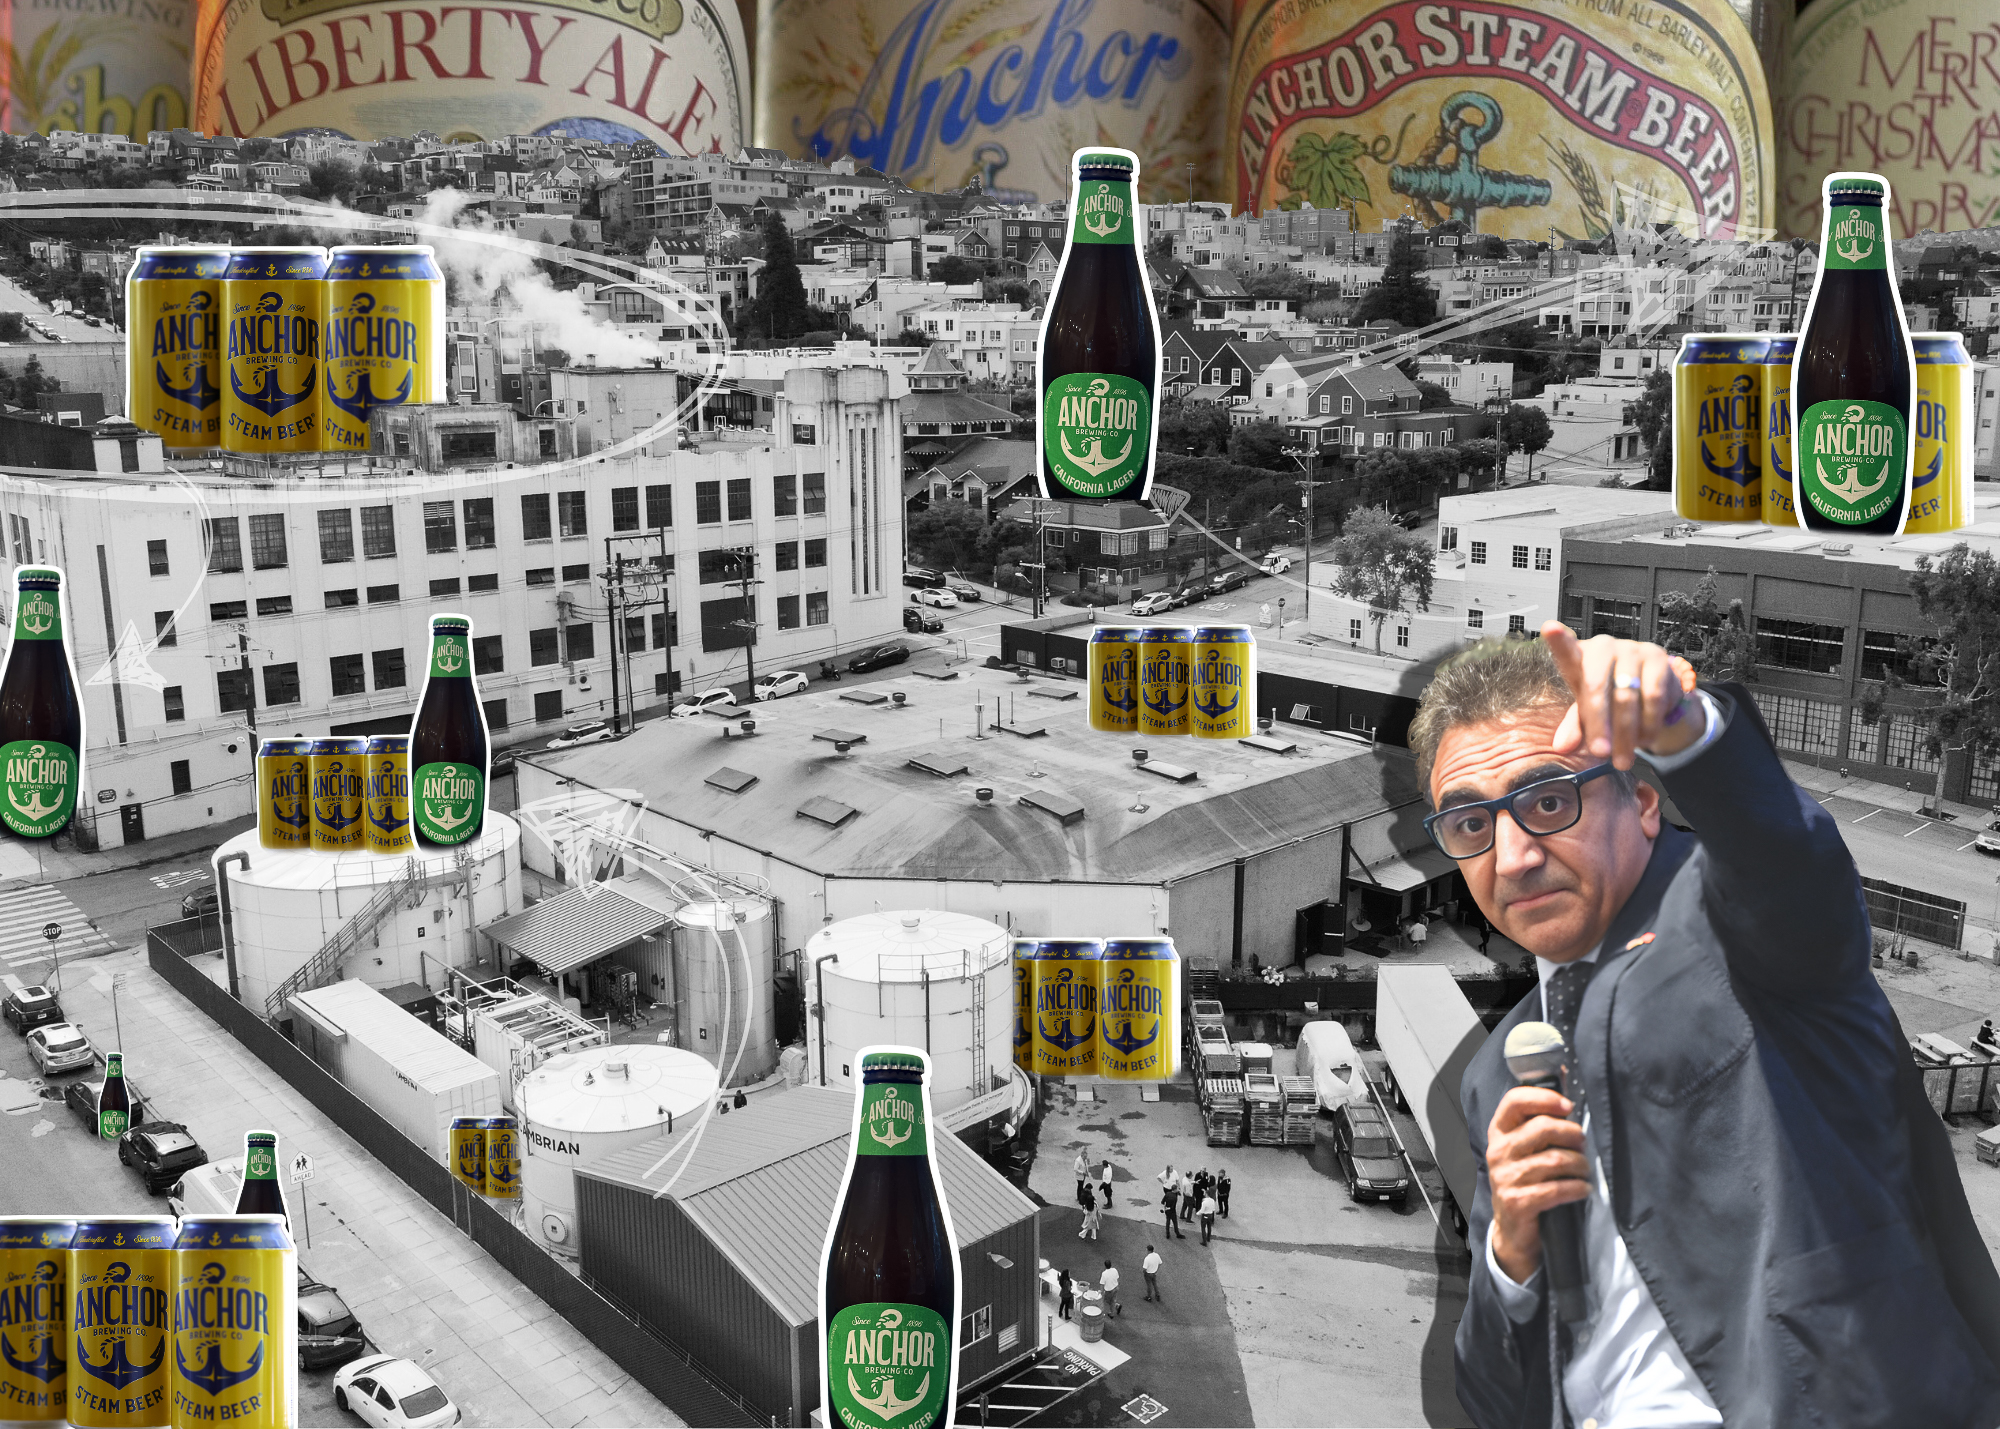 The image features a black-and-white photo of an industrial area with various Anchor Steam beer cans and bottles superimposed, and a man with a microphone pointing.